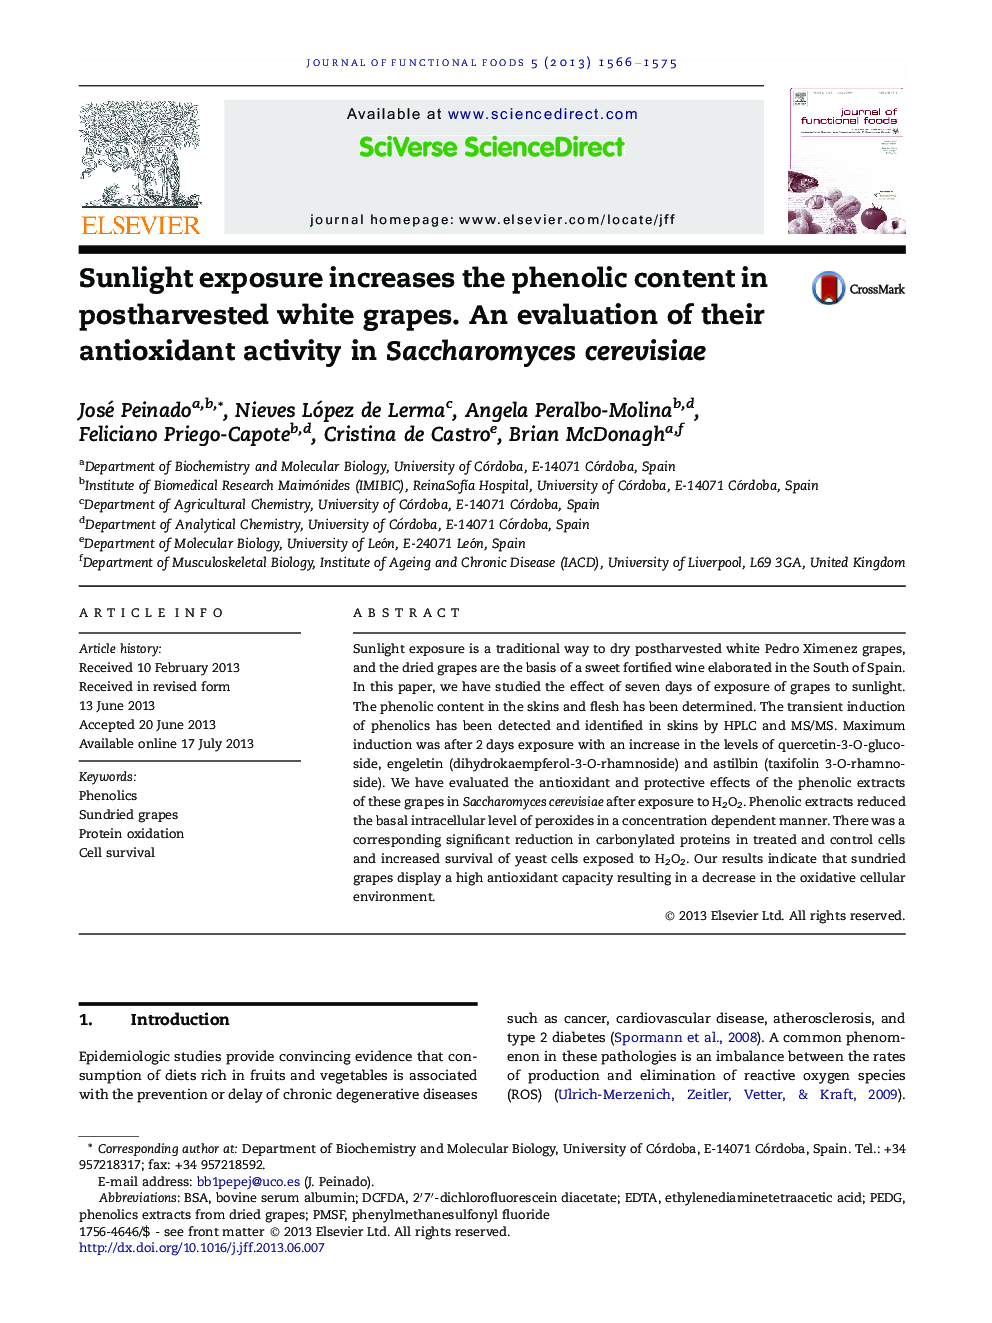 Sunlight exposure increases the phenolic content in postharvested white grapes. An evaluation of their antioxidant activity in Saccharomyces cerevisiae